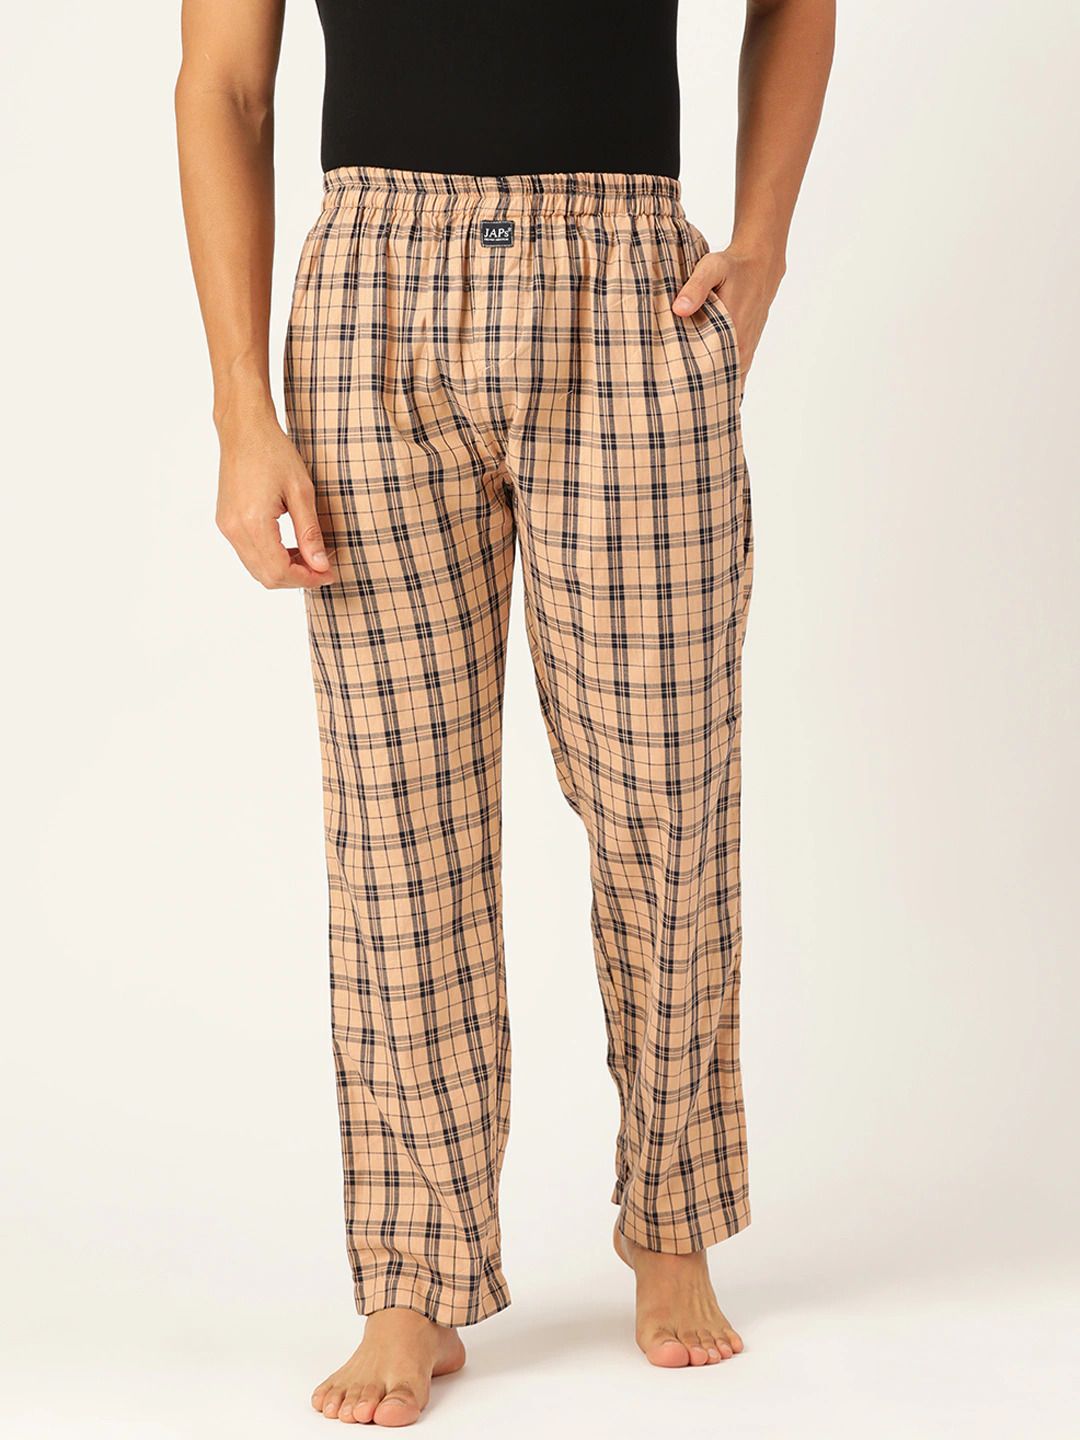 Buy STOP Womens Checked Trousers  Shoppers Stop